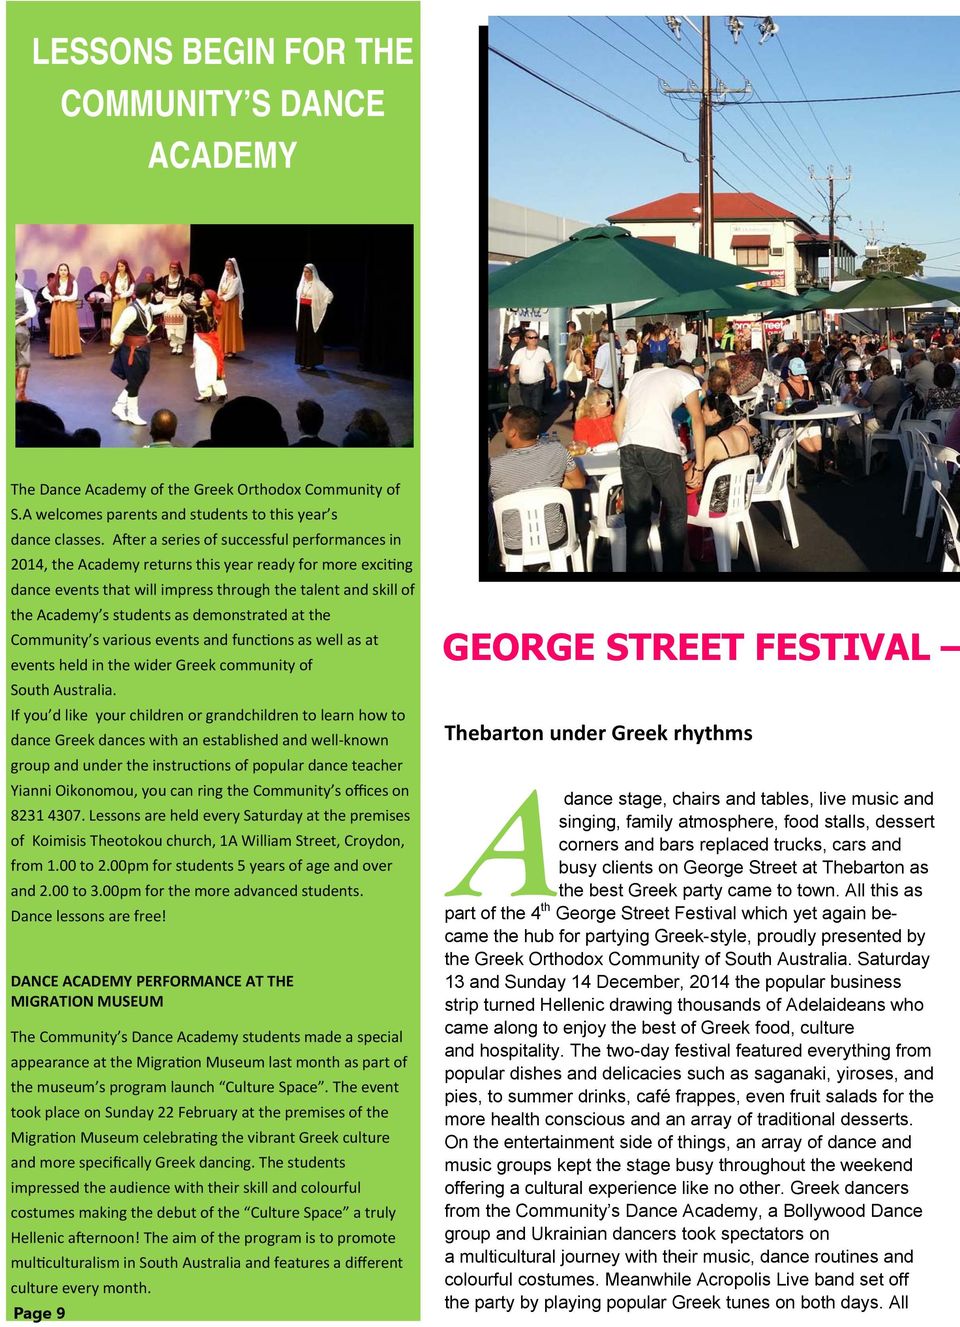 demonstrated at the Community s various events and func ons as well as at events held in the wider Greek community of South Australia.